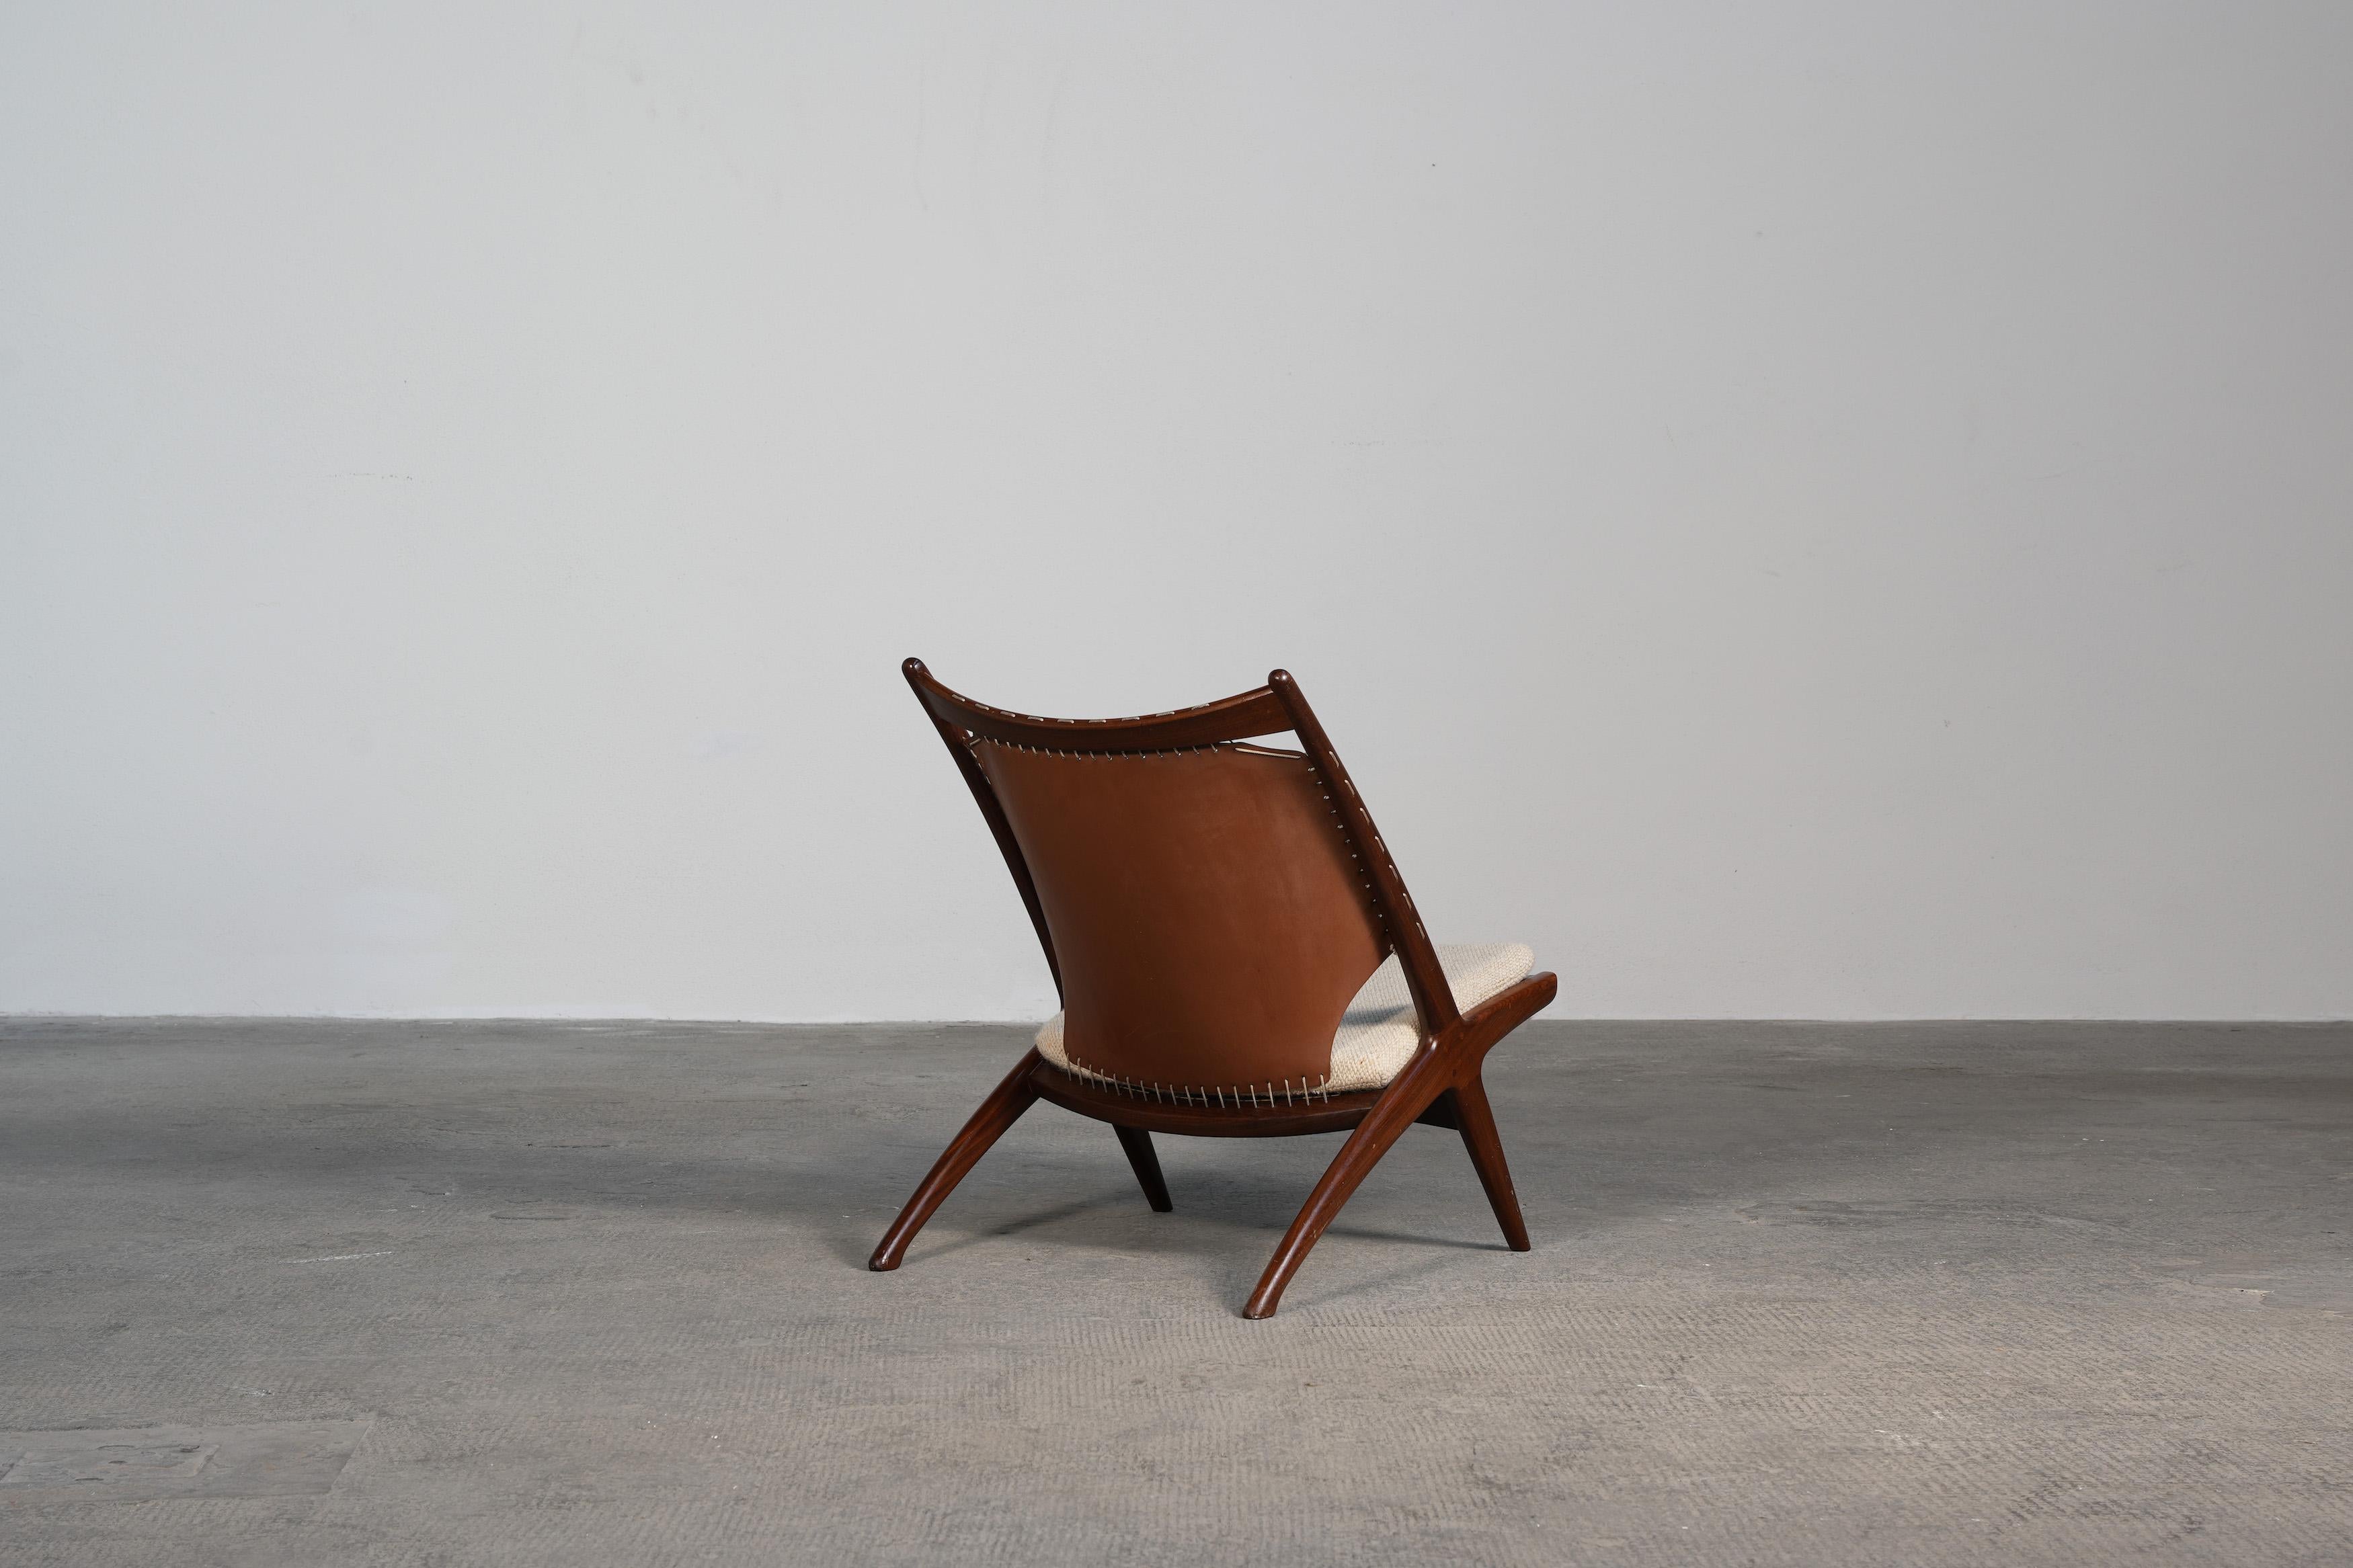 20th Century Lounge Chair by Fredrik Kayser & Adolf Relling for Gustav Bahus, Norway 1955